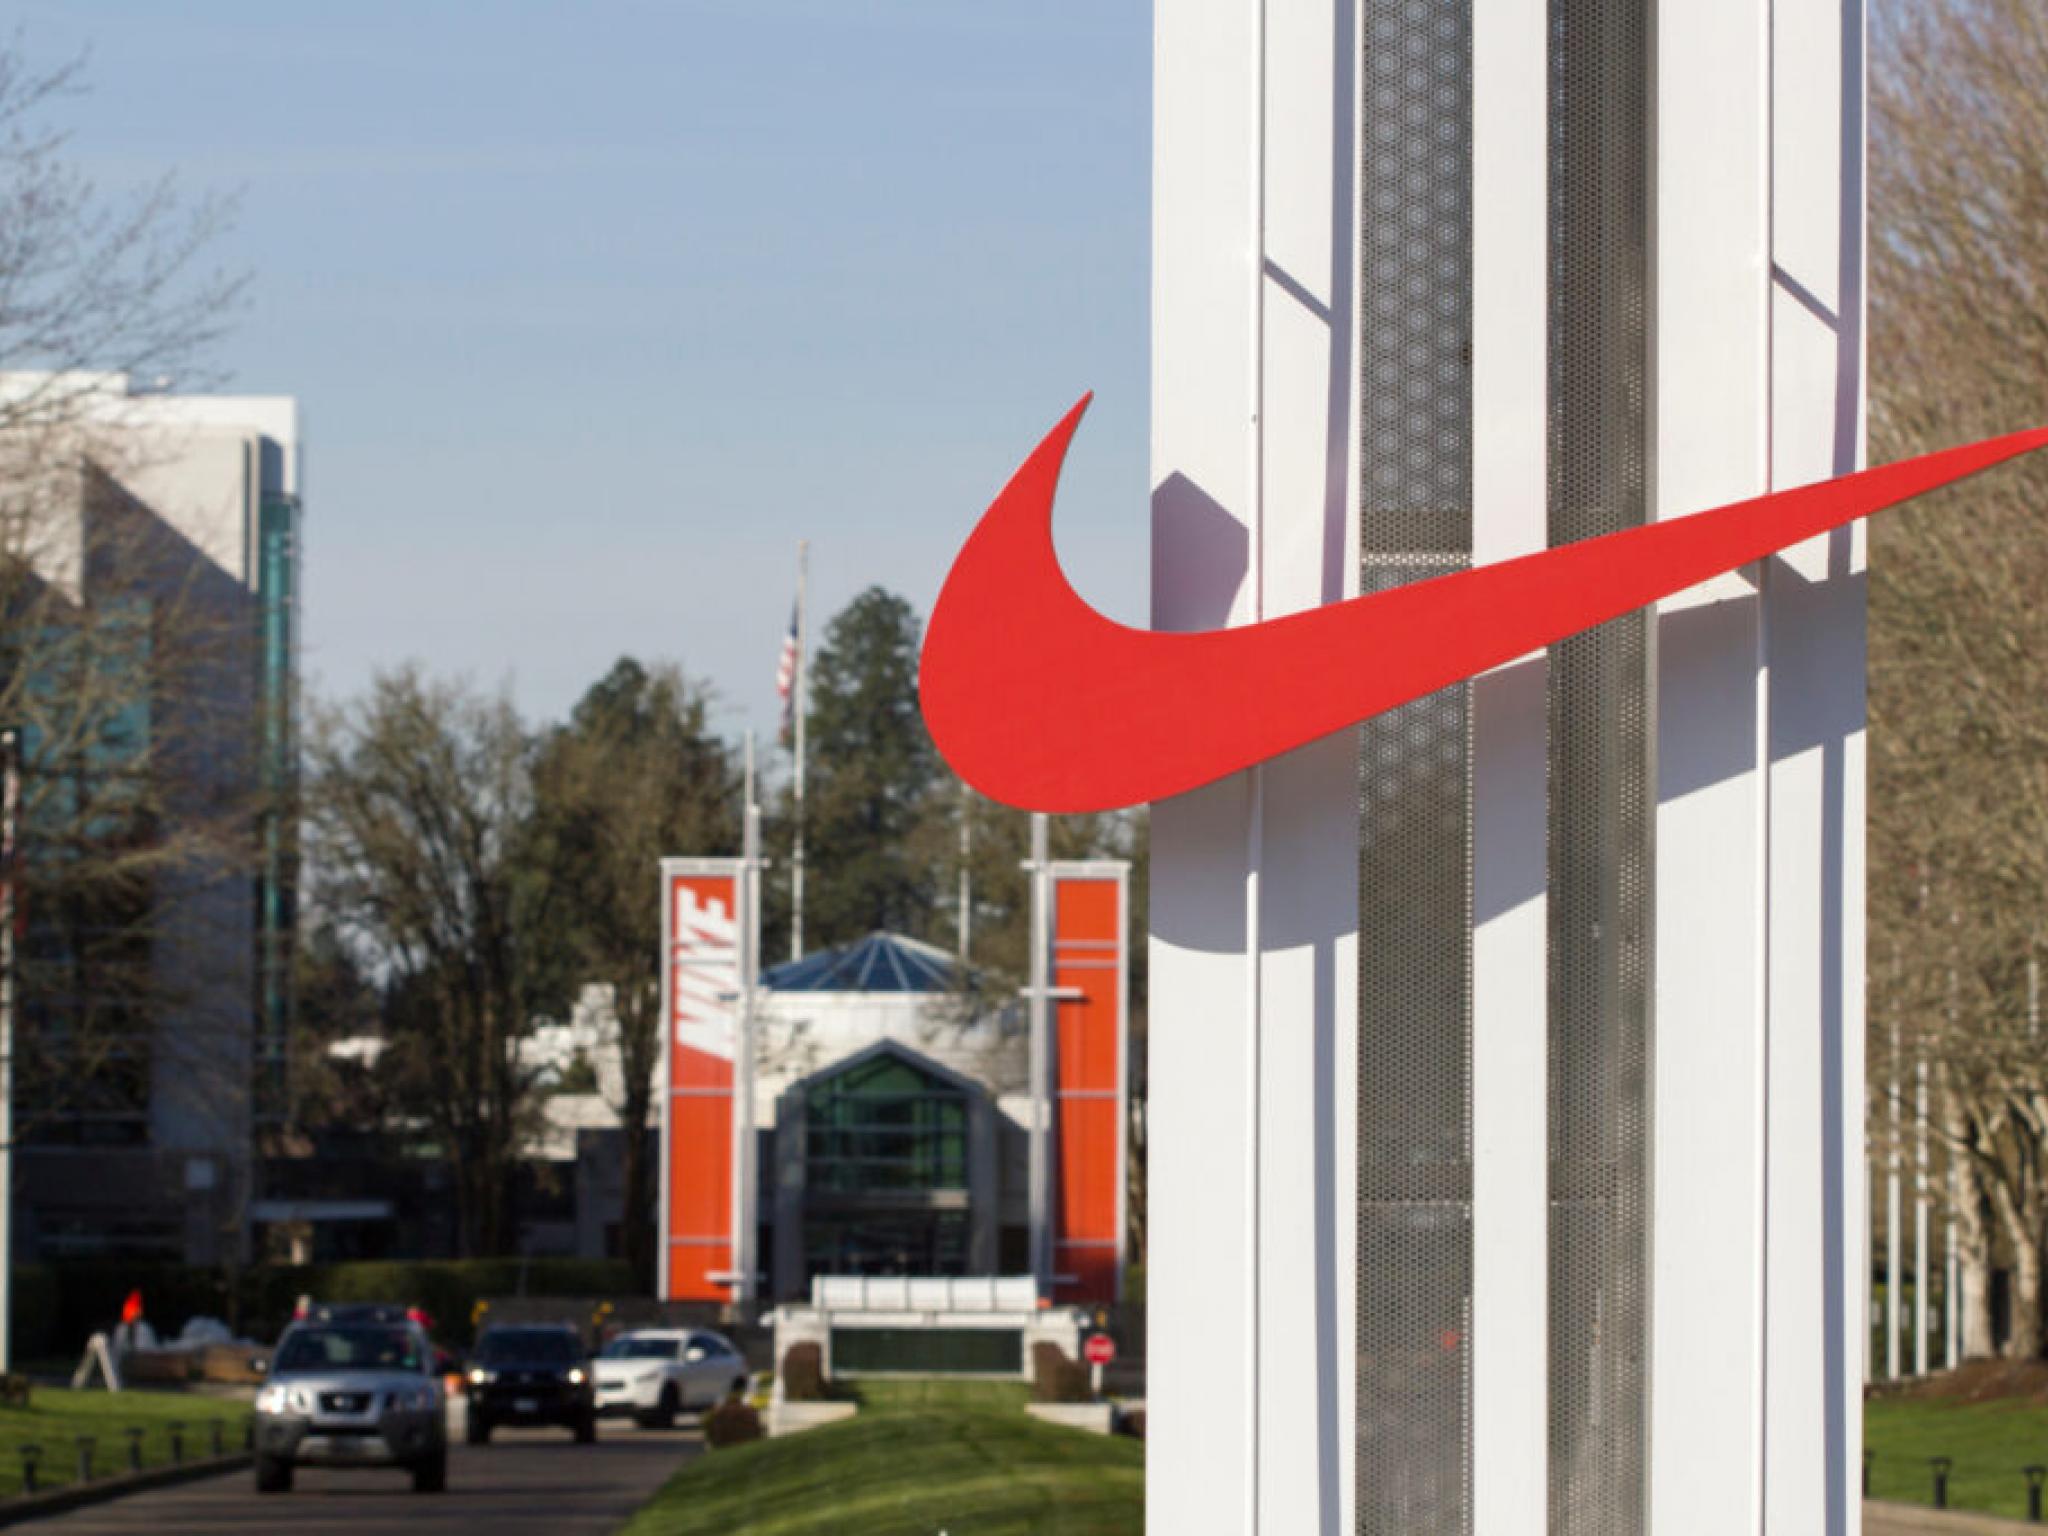  nikes-bid-to-trademark-footware-thwarted-by-eu-court 